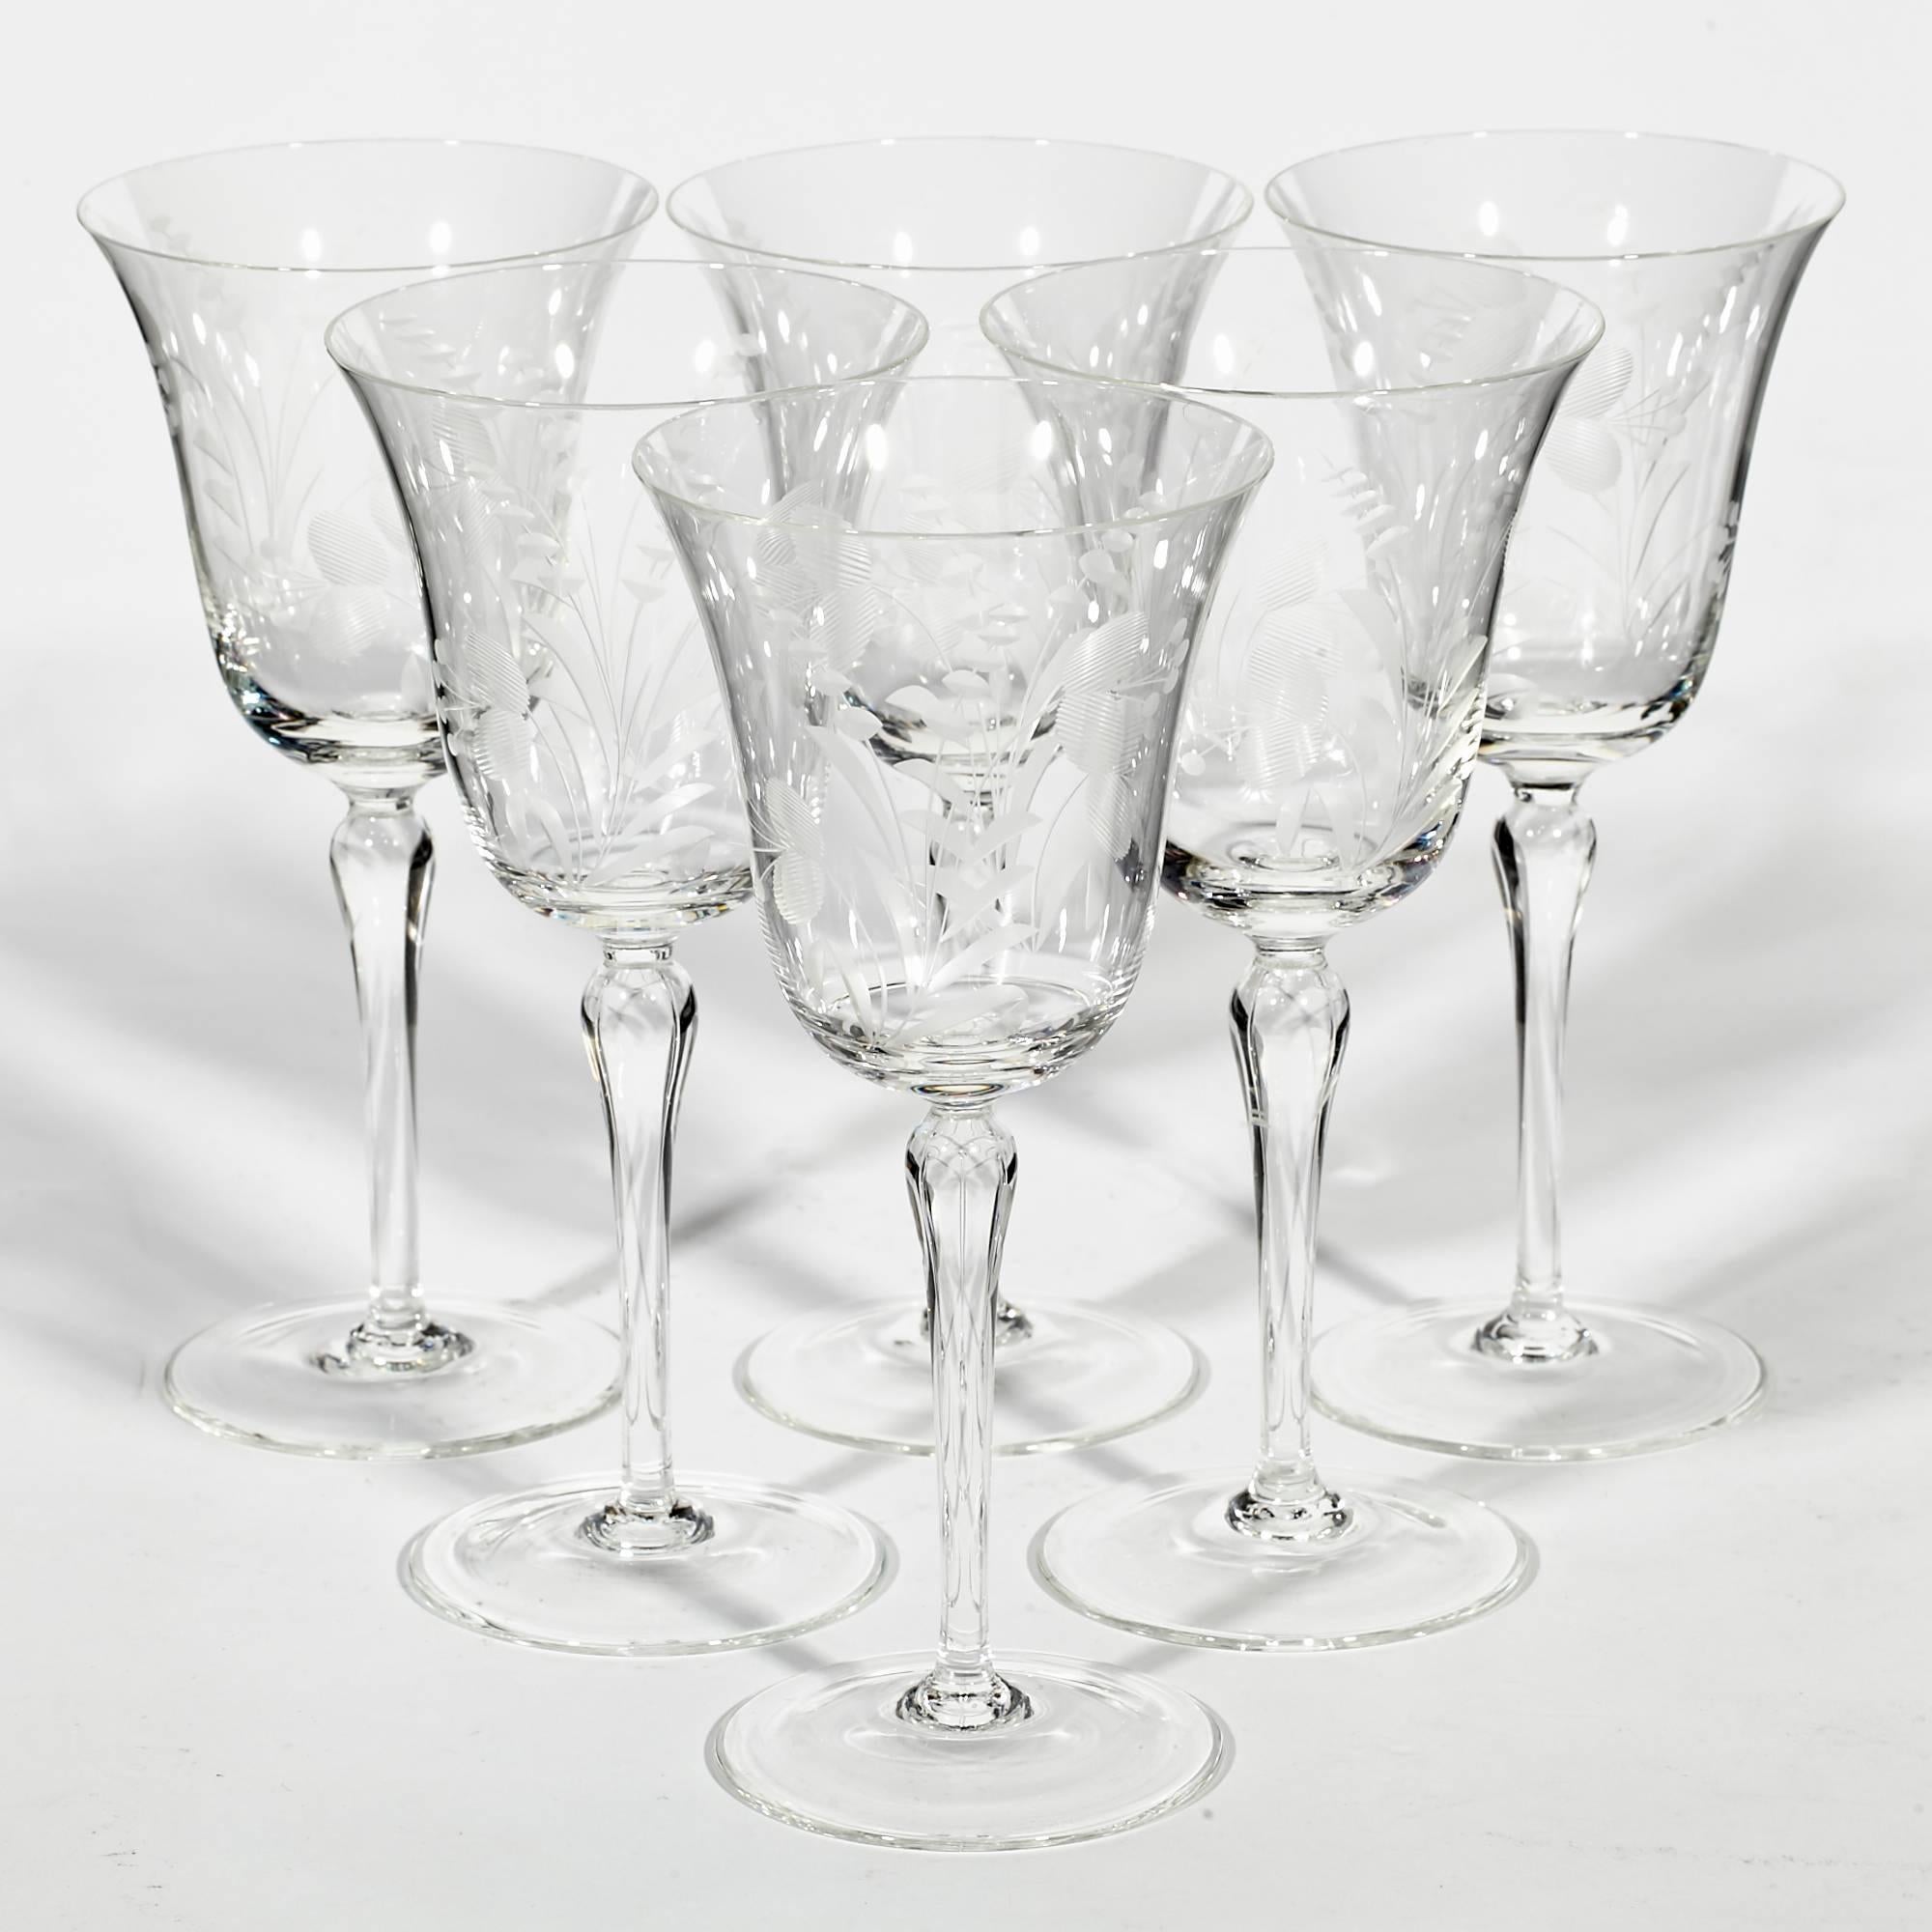 Vintage 1950s set of six floral etched and cut-glass tall wine stems.